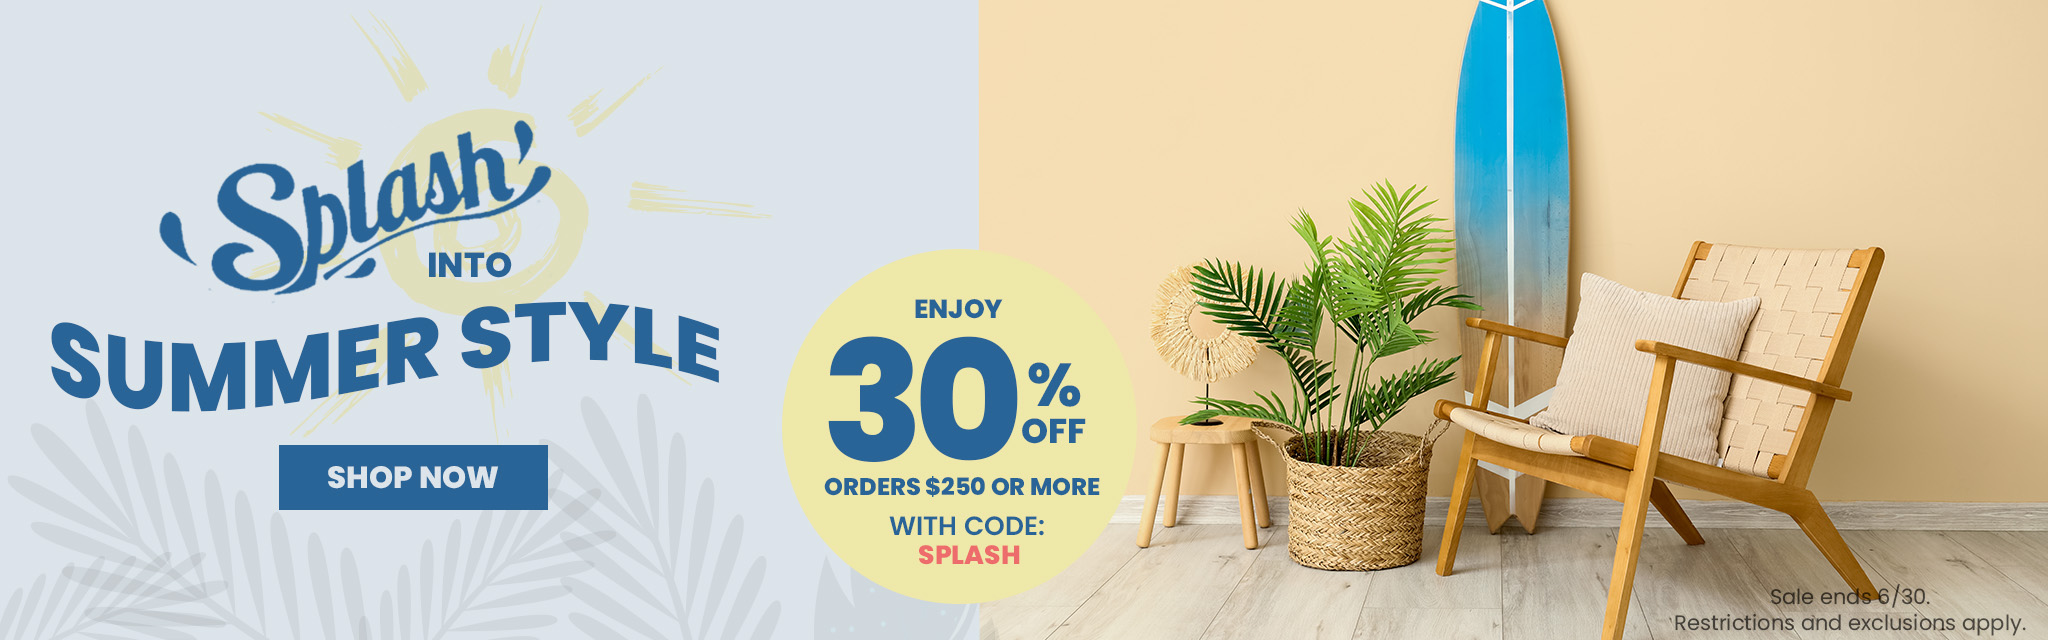 Splash Into Summer Style. Enjoy 30% Off Orders $250 Or More With Code: SPLASH. Shop Now. Sale ends 6/30. Restrictions and exclusions apply. 